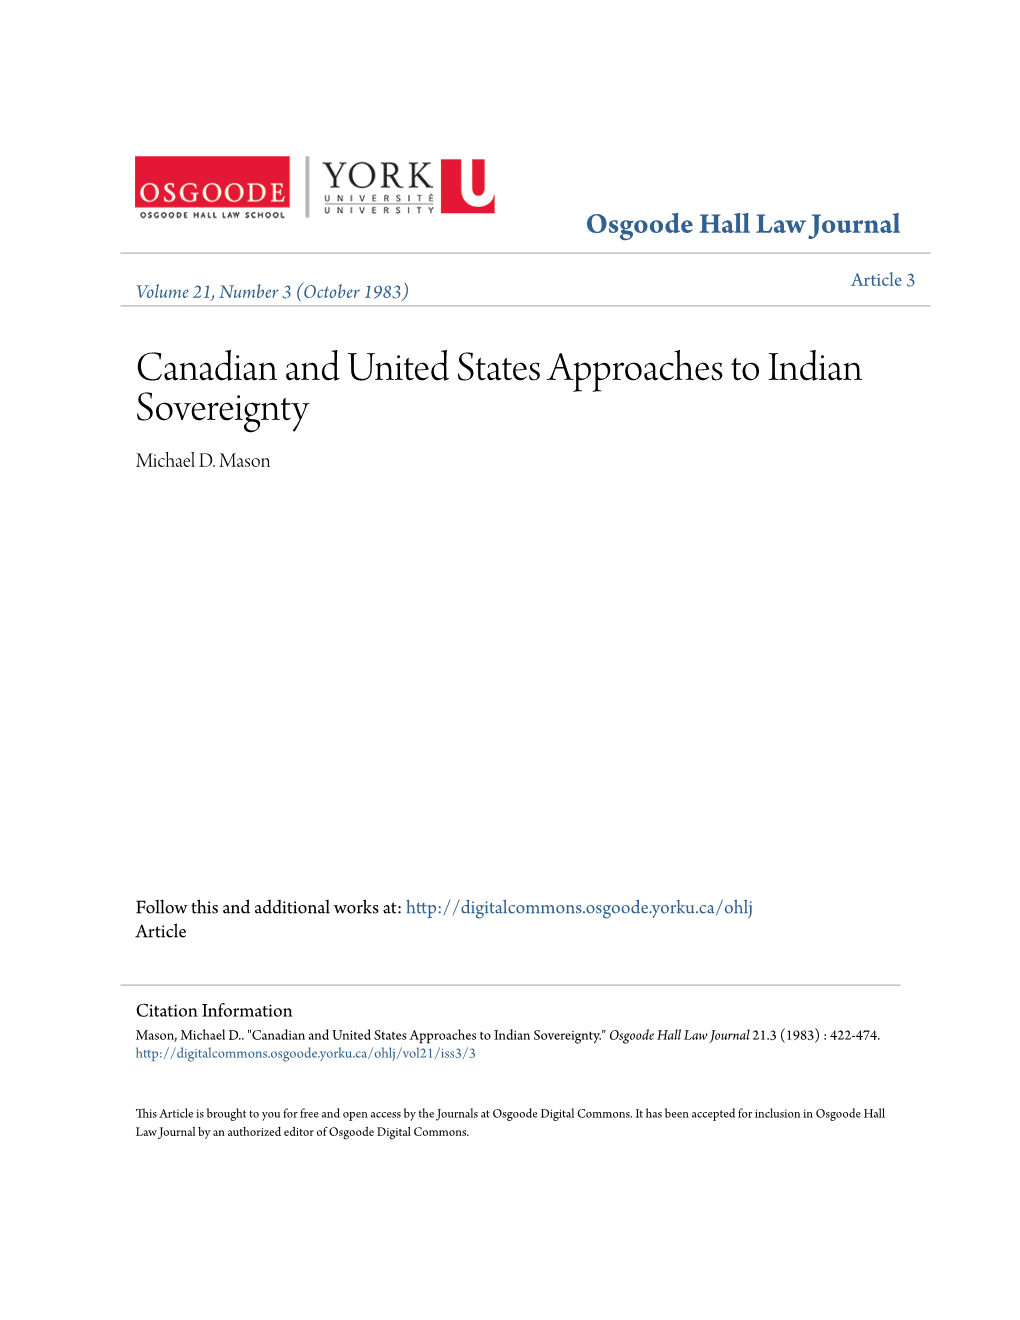 Canadian and United States Approaches to Indian Sovereignty Michael D